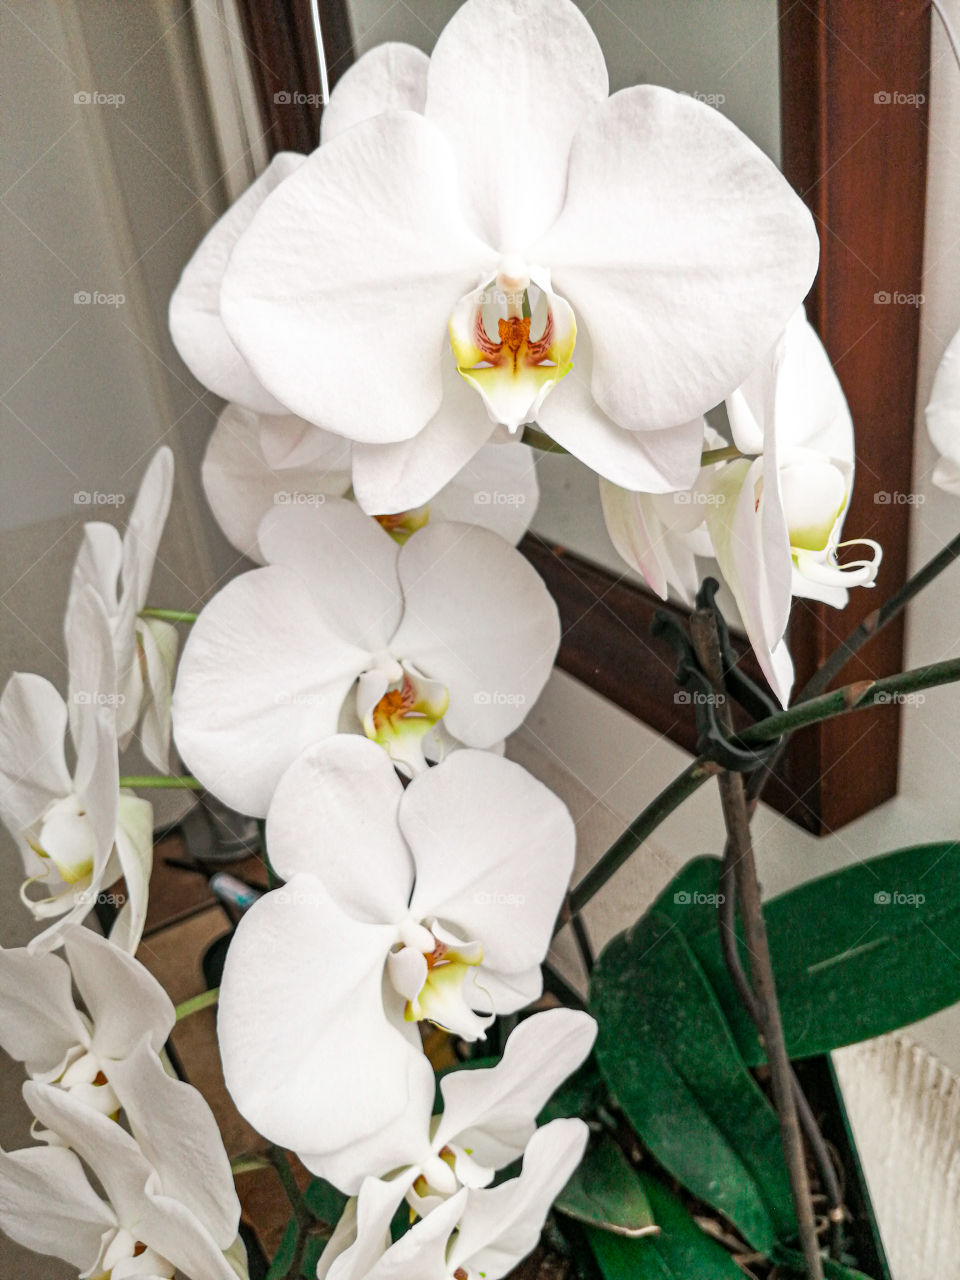 An Orchid's beauty!